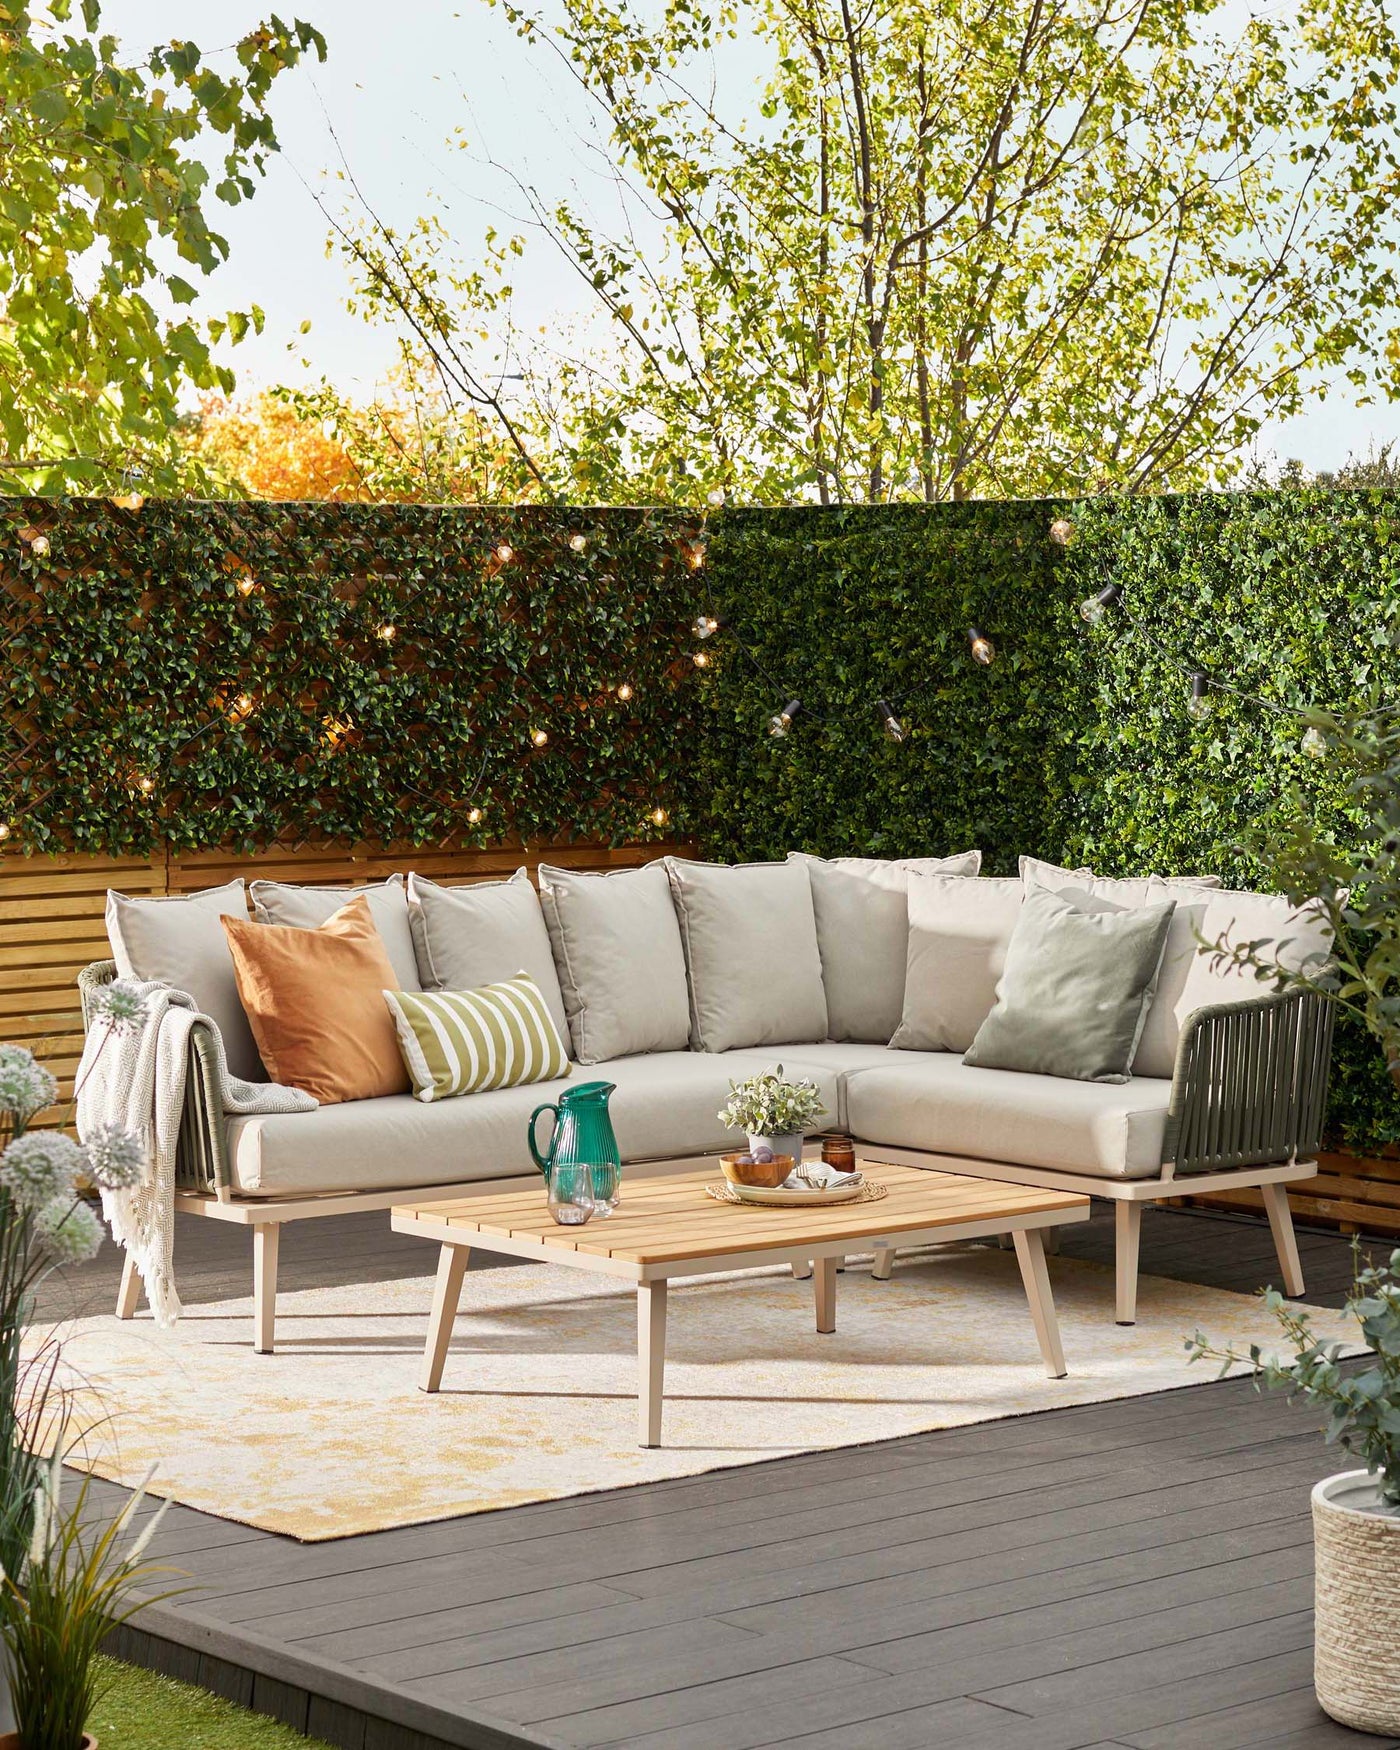 Contemporary outdoor furniture set on a wooden deck, featuring a beige corner sectional sofa with plush seat and back cushions, paired with a modern rectangular wooden coffee table. Decorative accents include assorted throw pillows in earth tones, a fringed throw blanket, a blue glass pitcher, and small potted plants. A cream and yellow patterned area rug lies beneath the table, enhancing the cosy ambiance.